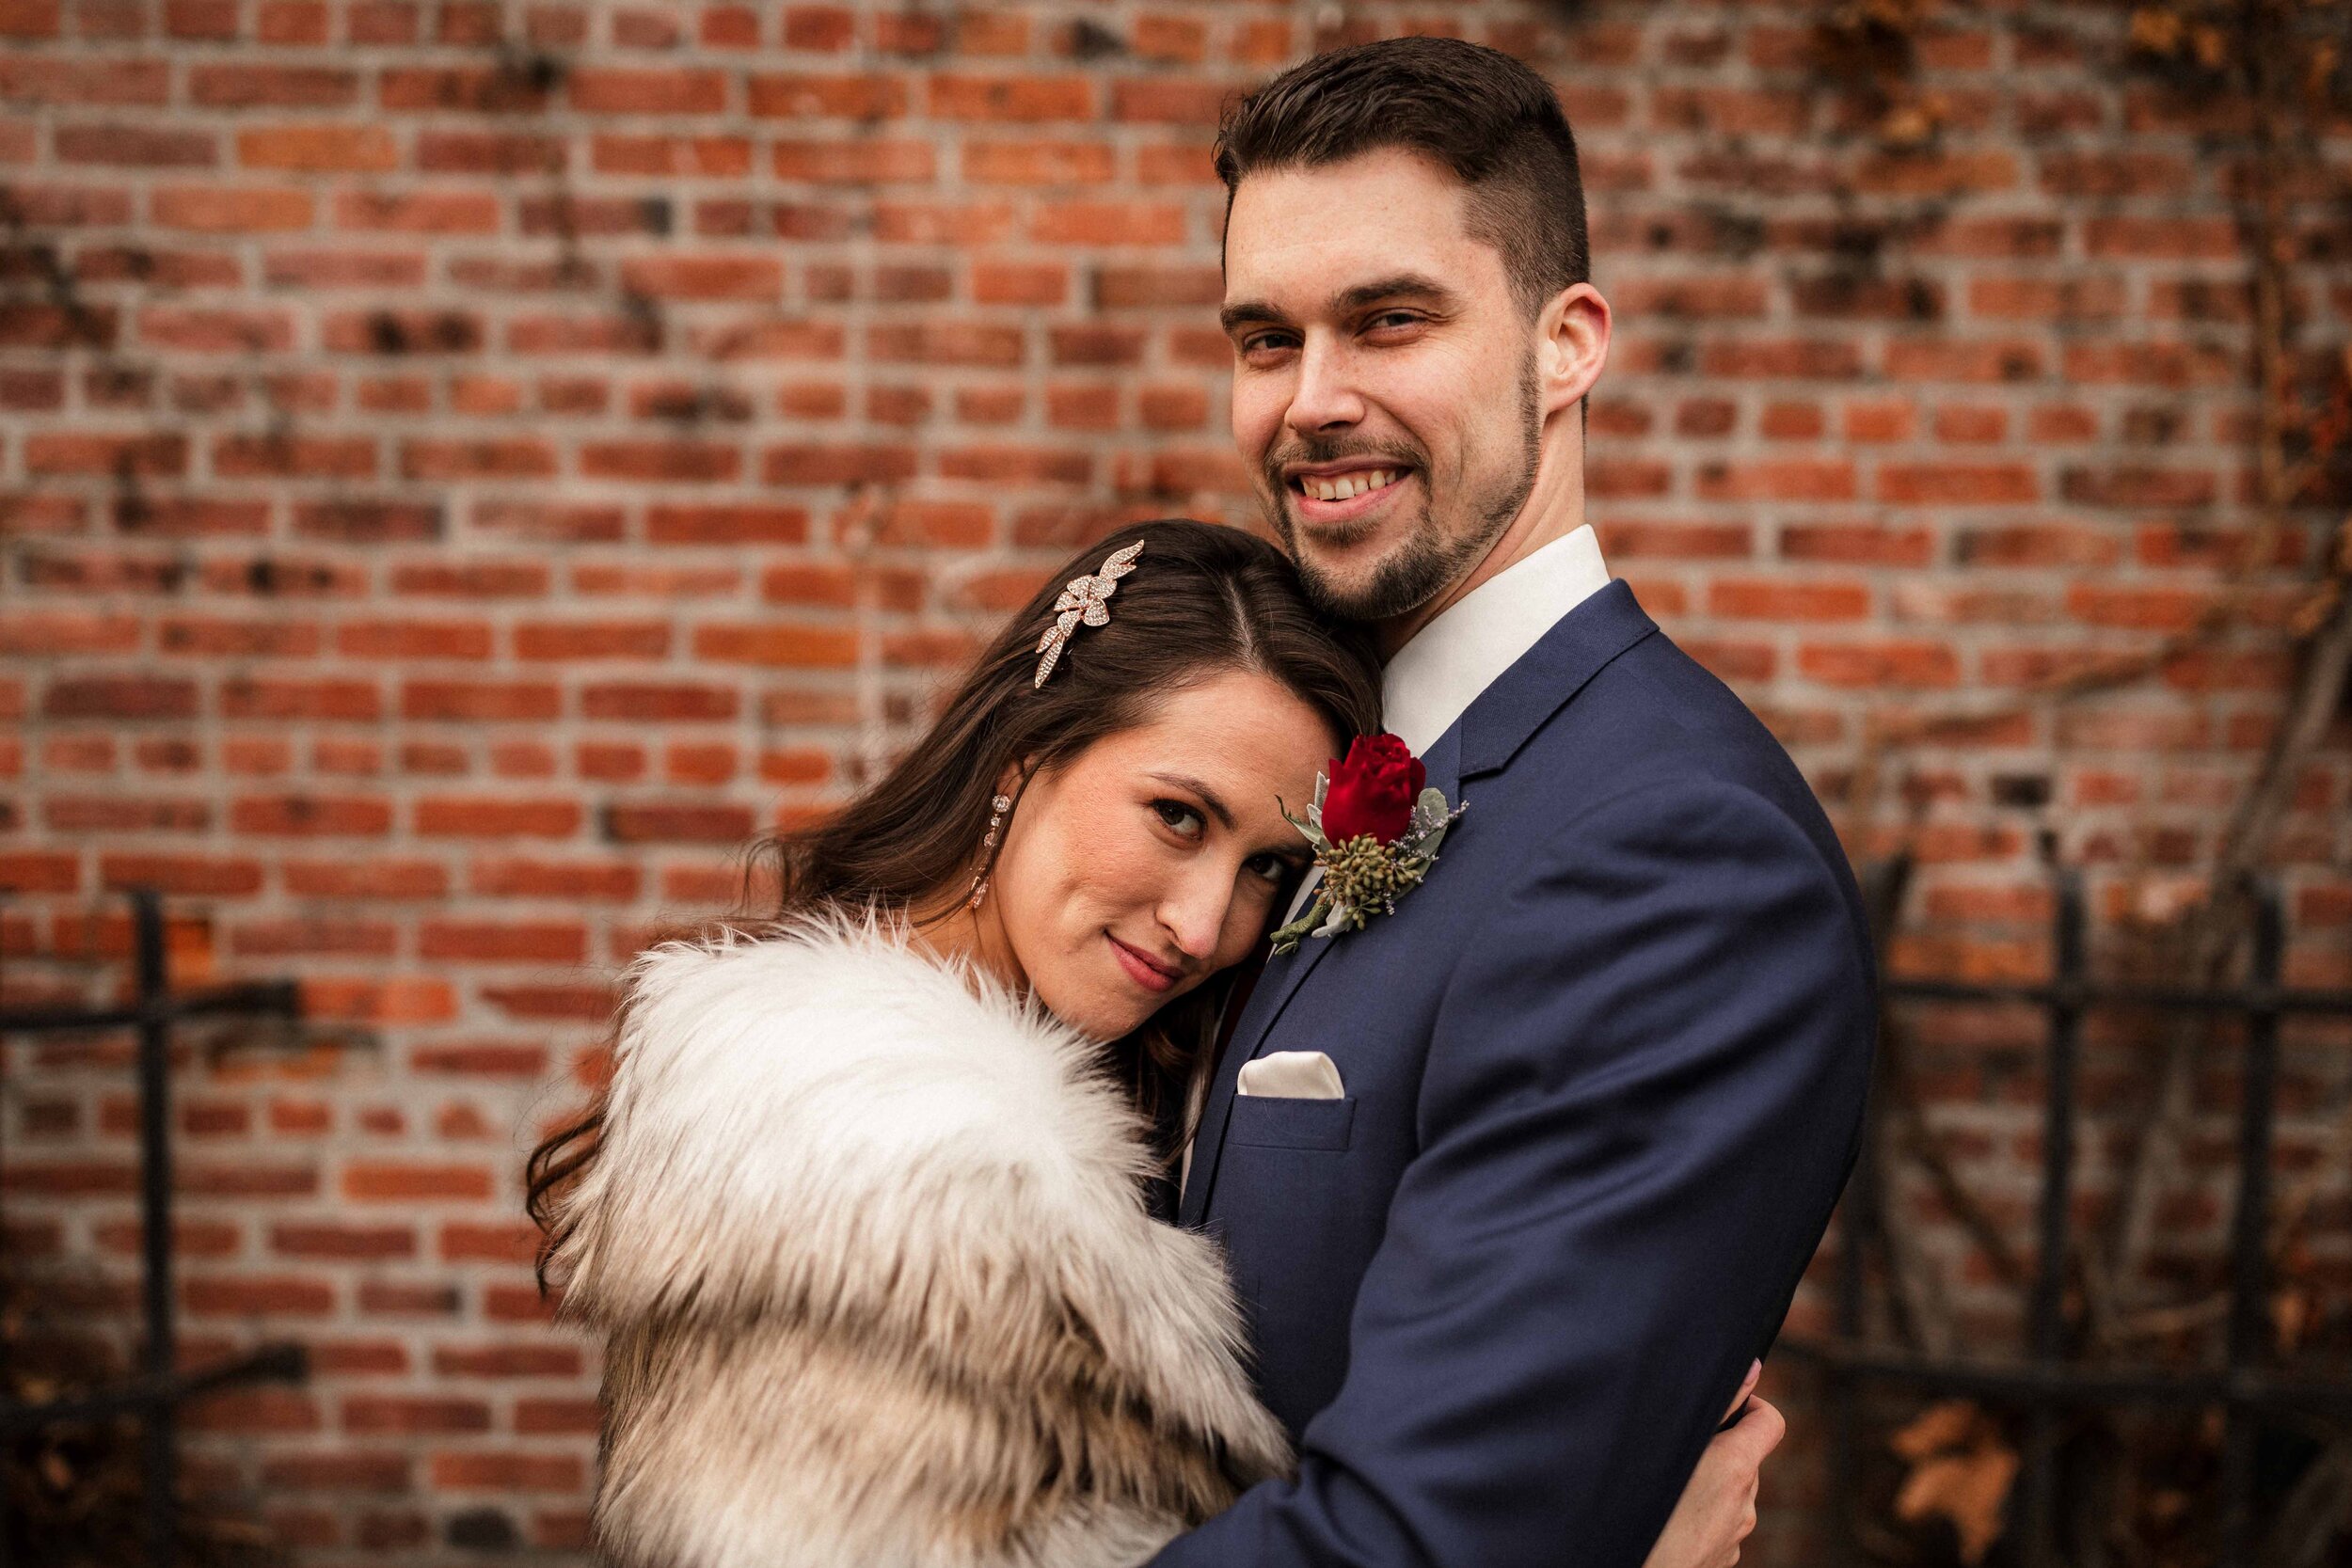 Downtown Seattle Elopement | Pioneer Square + Courthouse Elopement